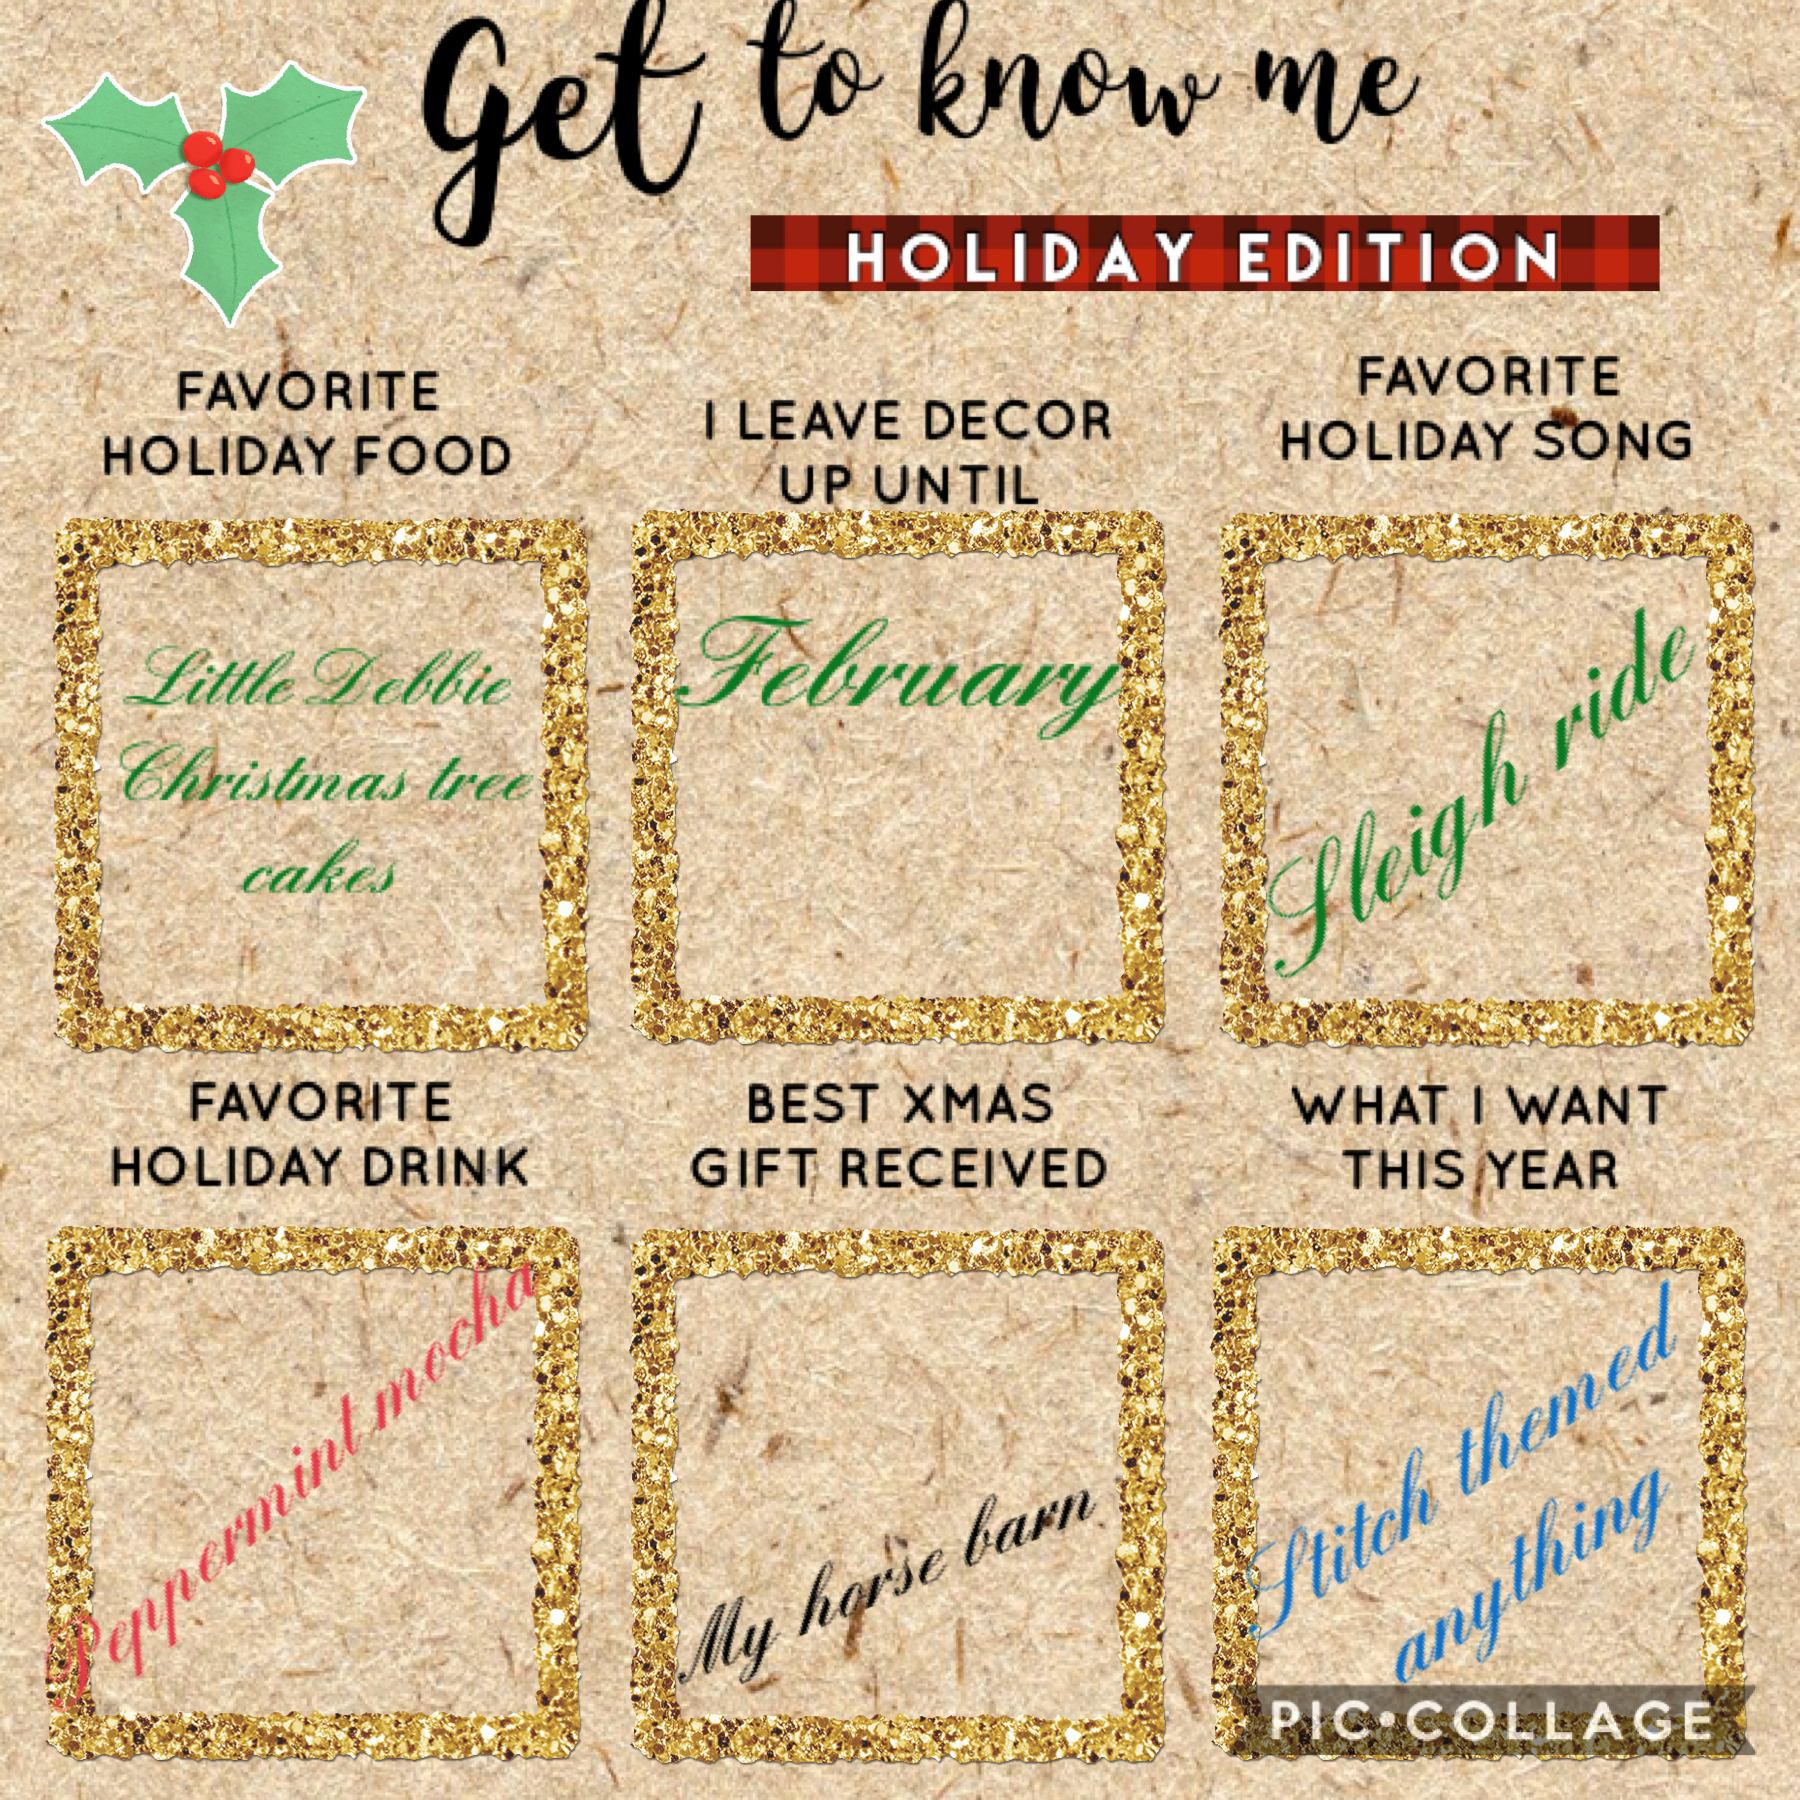 🎅tap 🎄

Get to know me I wanna know you guys😂